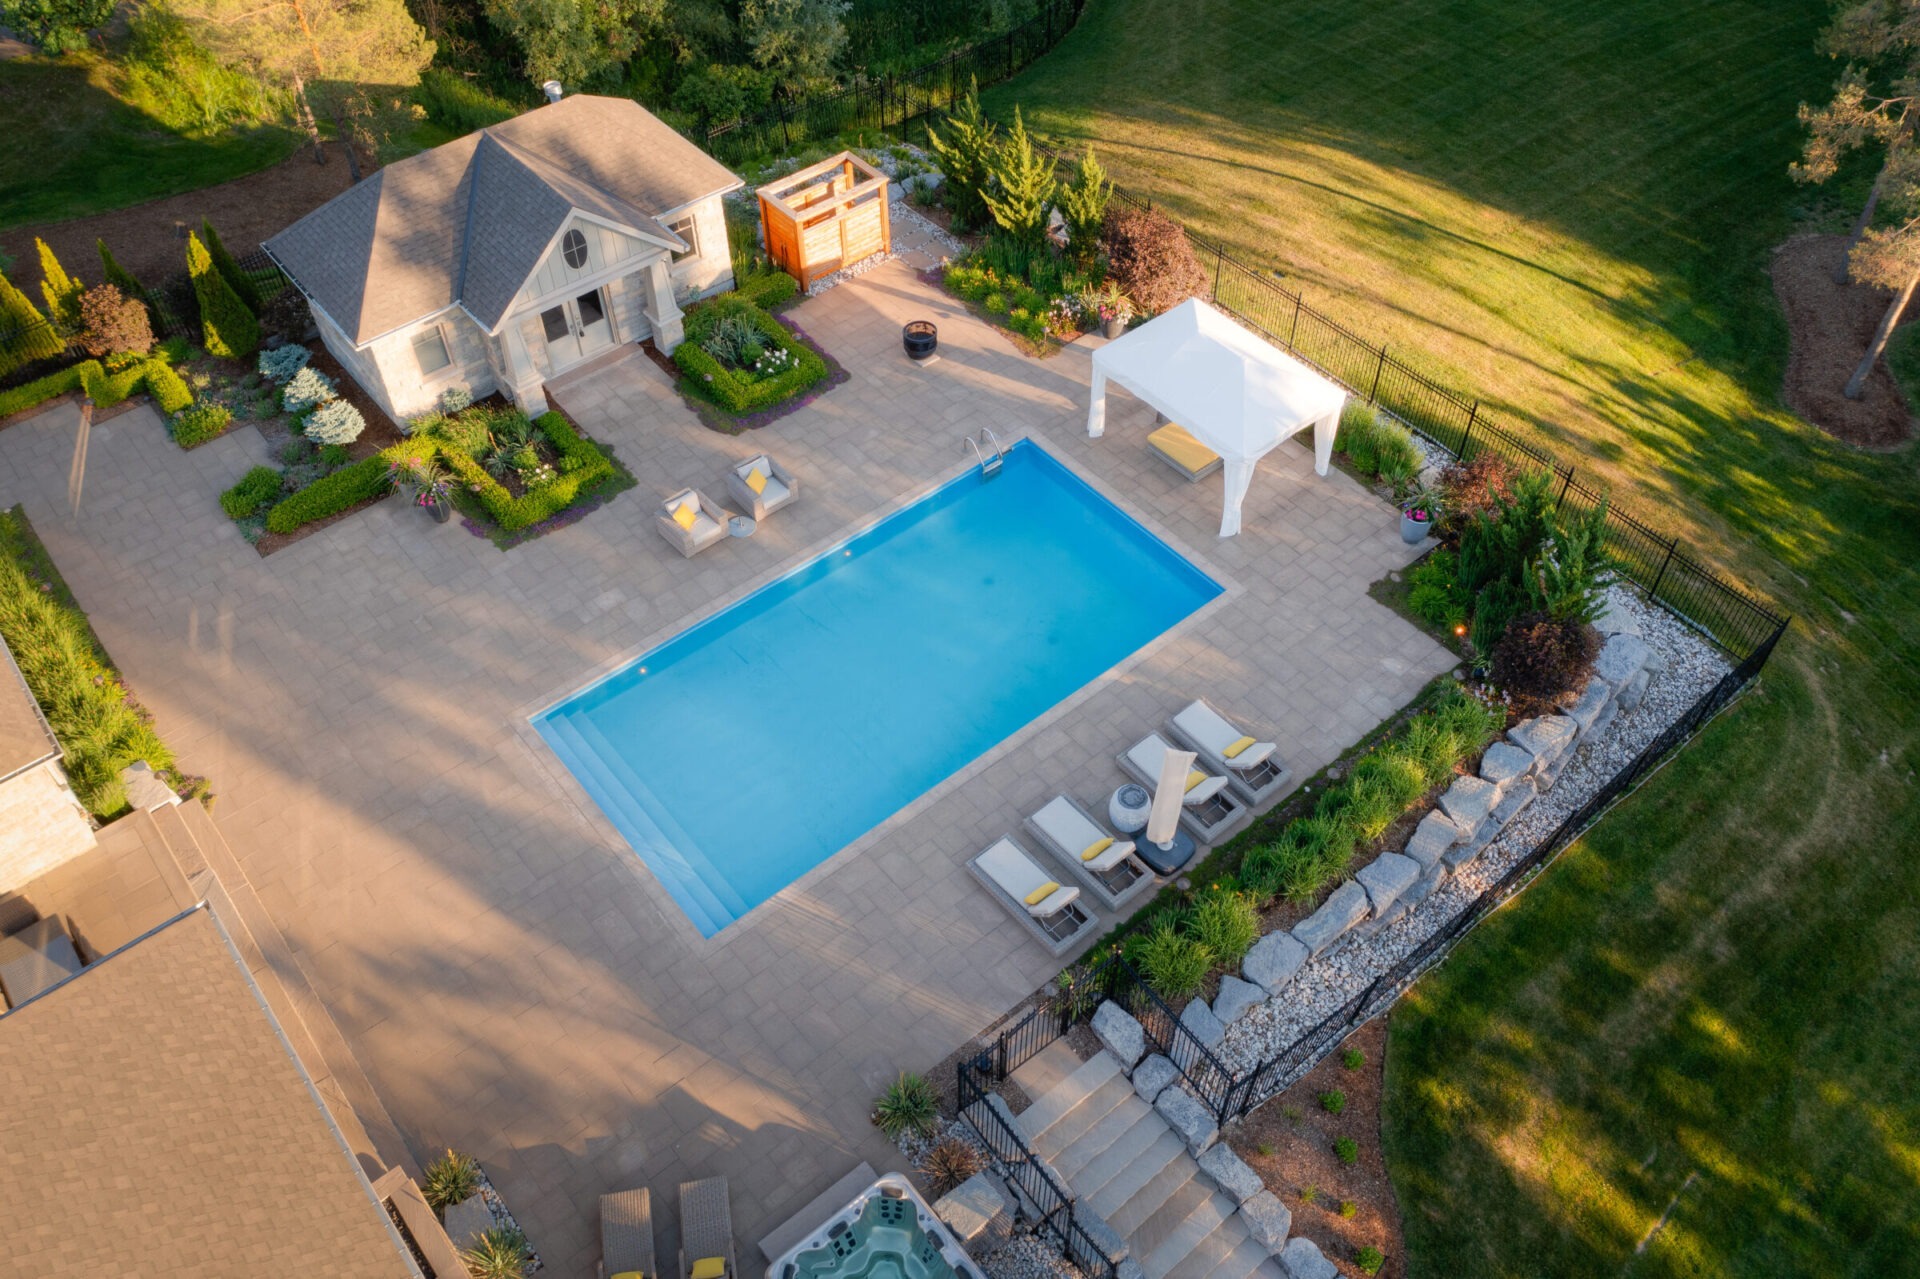 Aerial view of a backyard with a large swimming pool, patio, sun loungers, a gazebo, landscaping, and a hot tub adjoining a residential house.